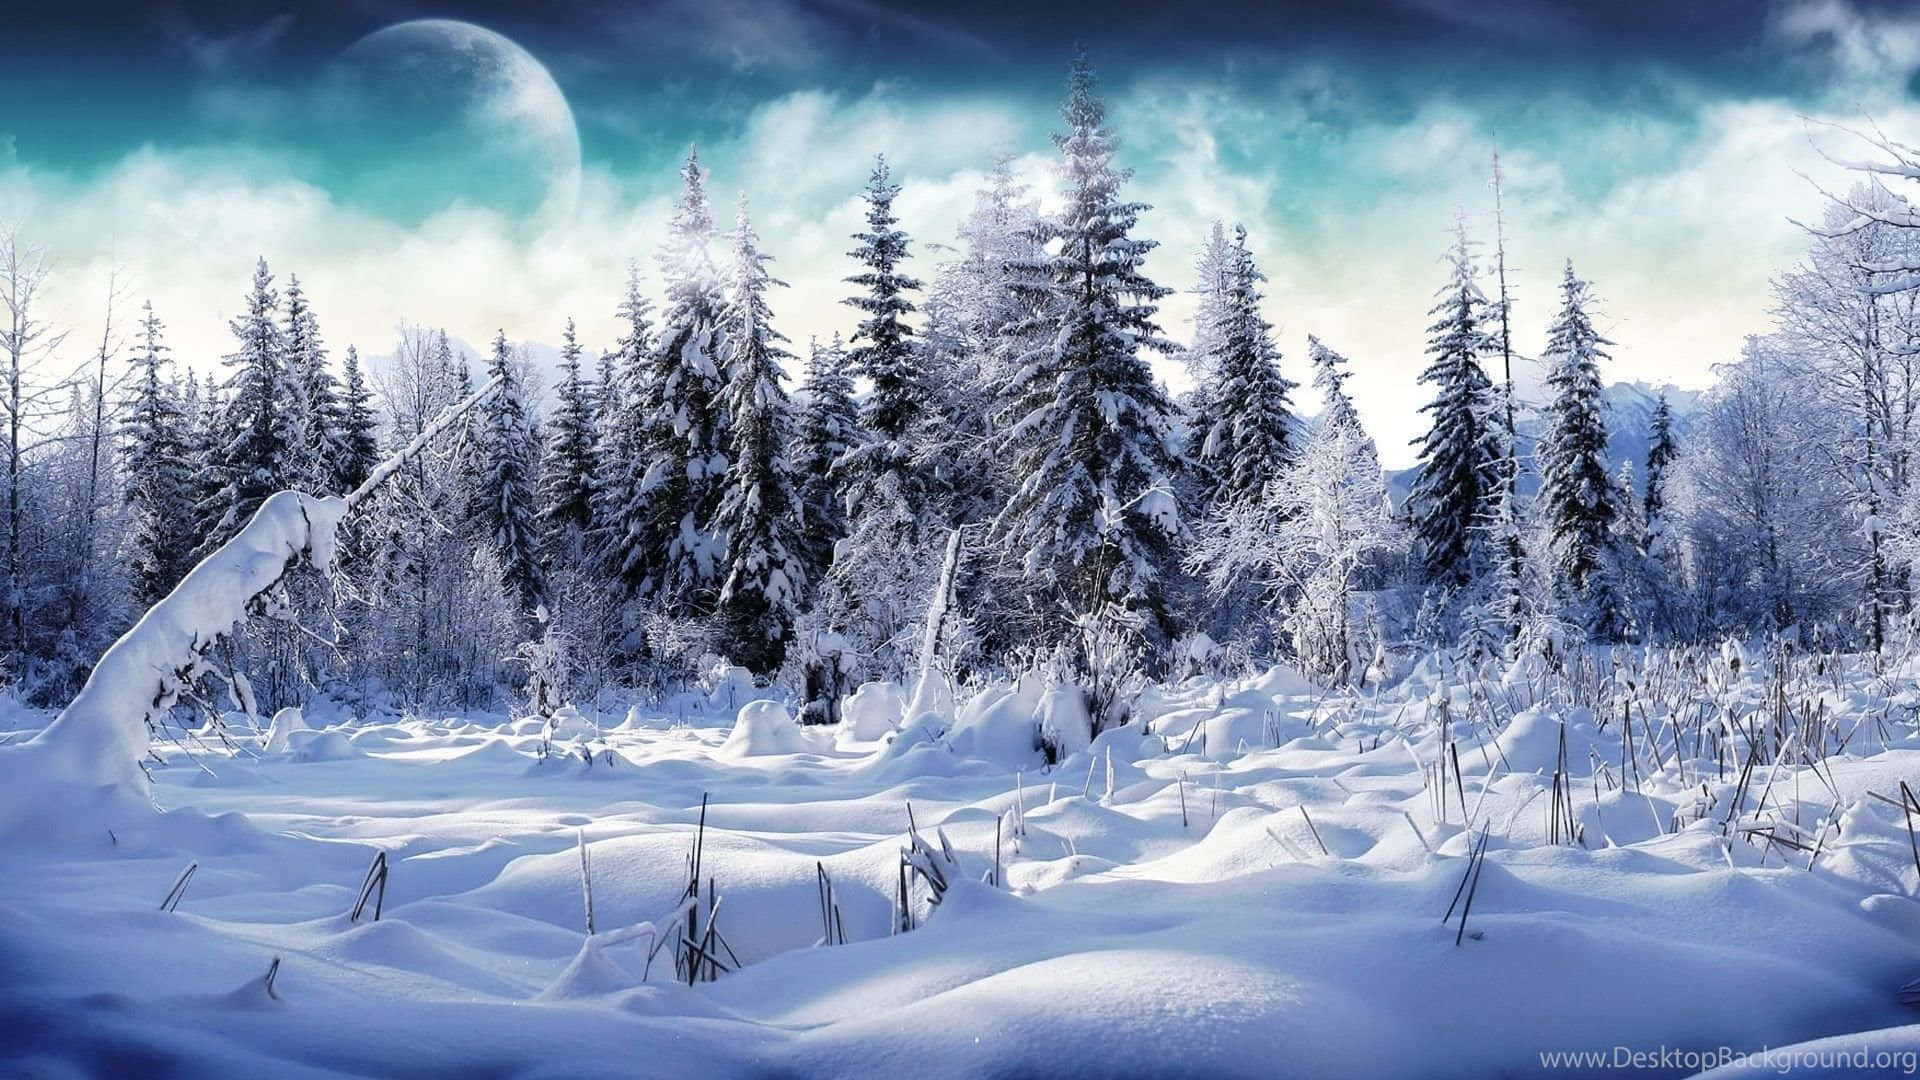 A Winter Scene With Snow Covered Trees And A Moon